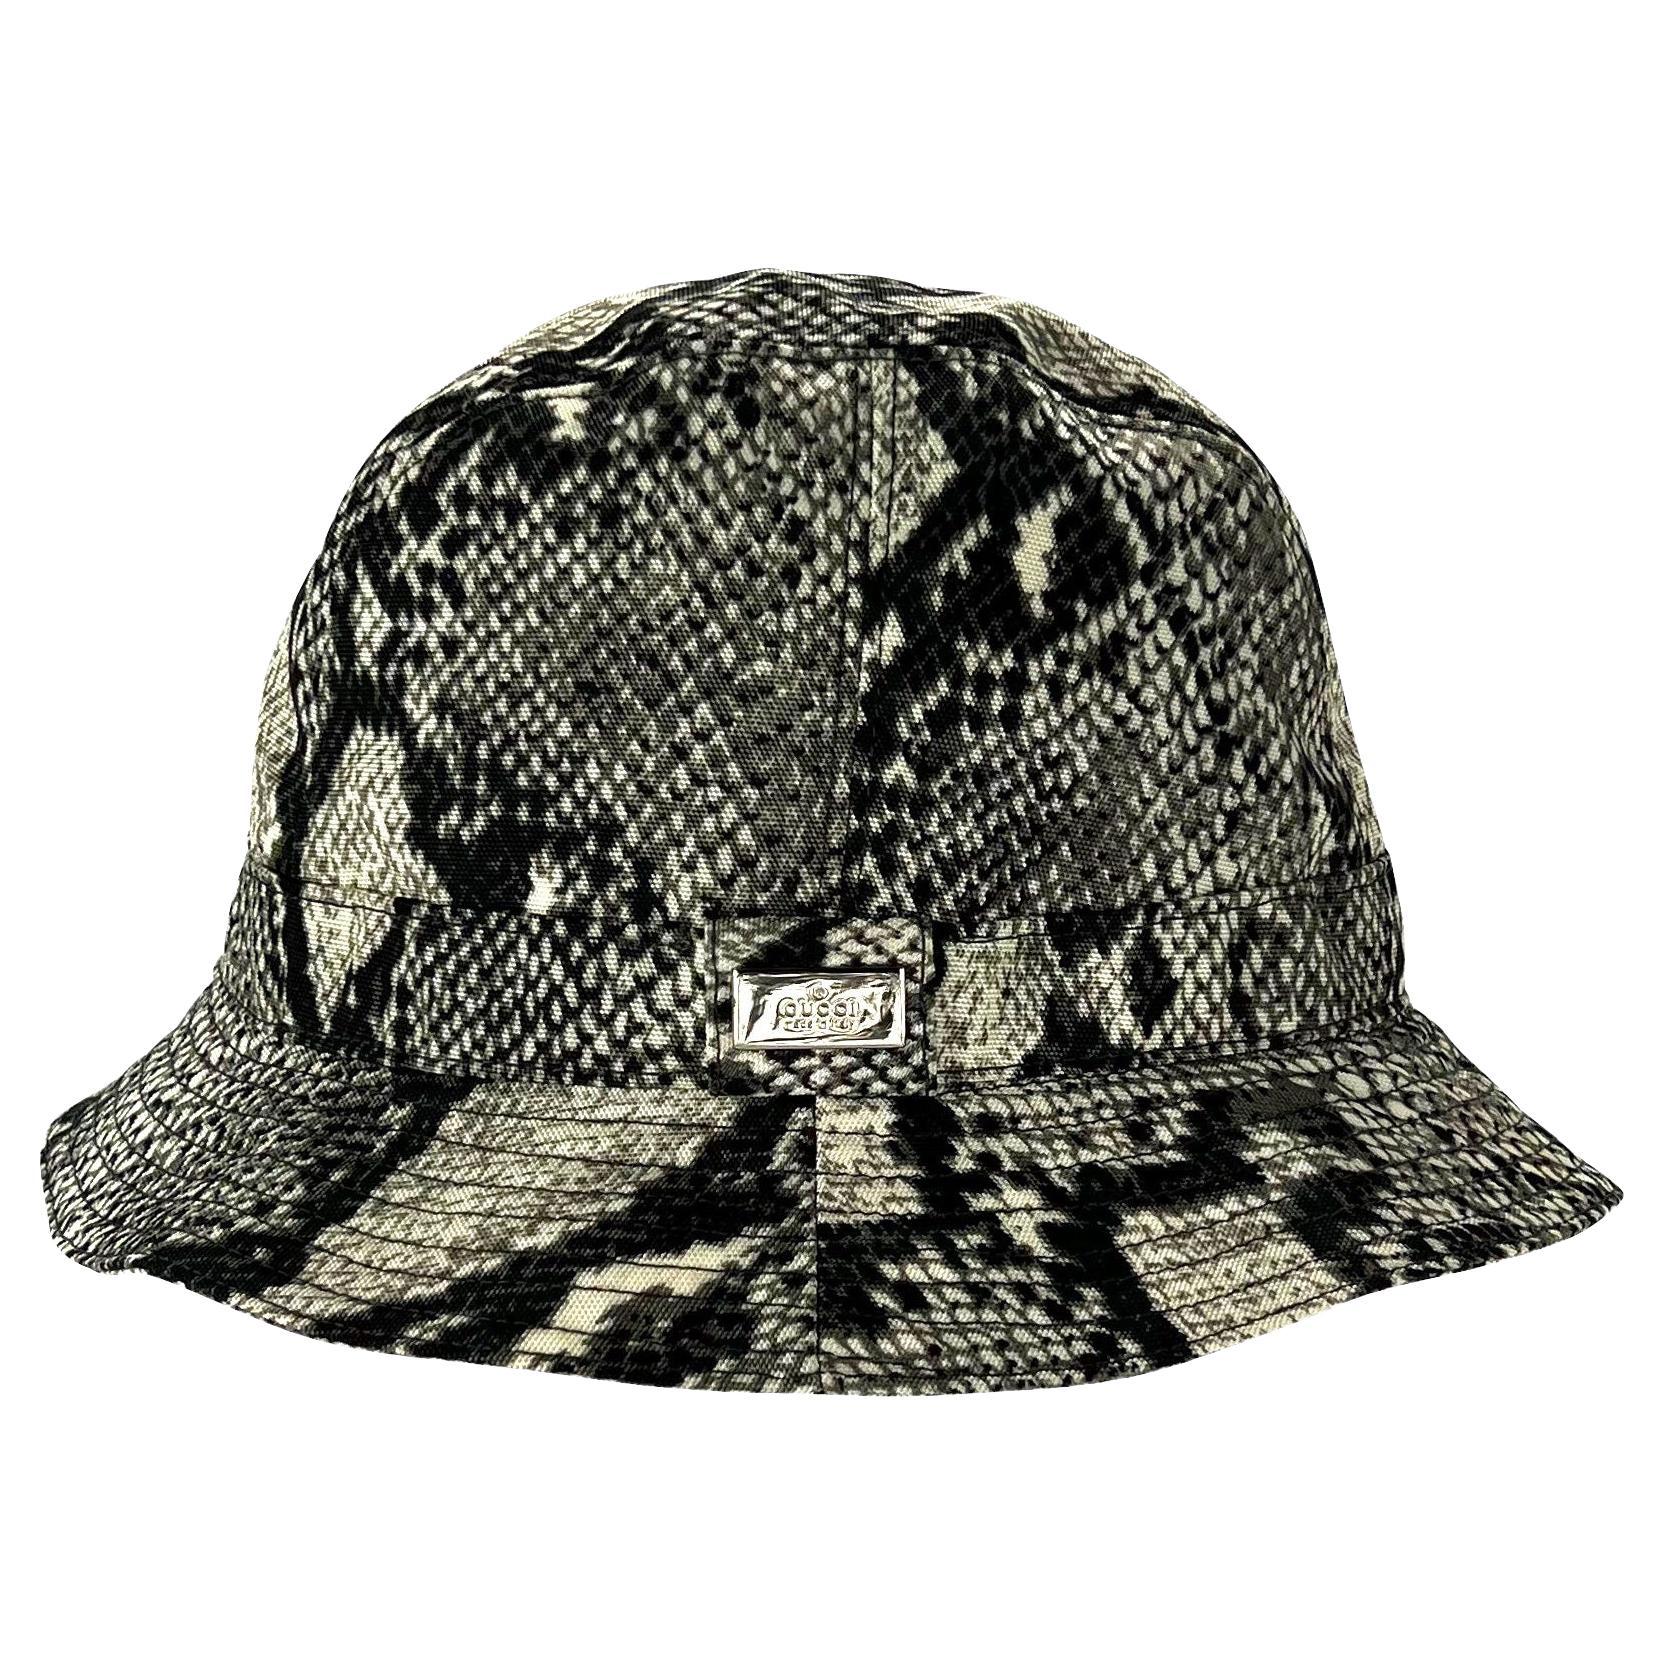 S/S 2000 Gucci by Tom Ford Snakeskin Print Grey Nylon Bucket Hat For Sale